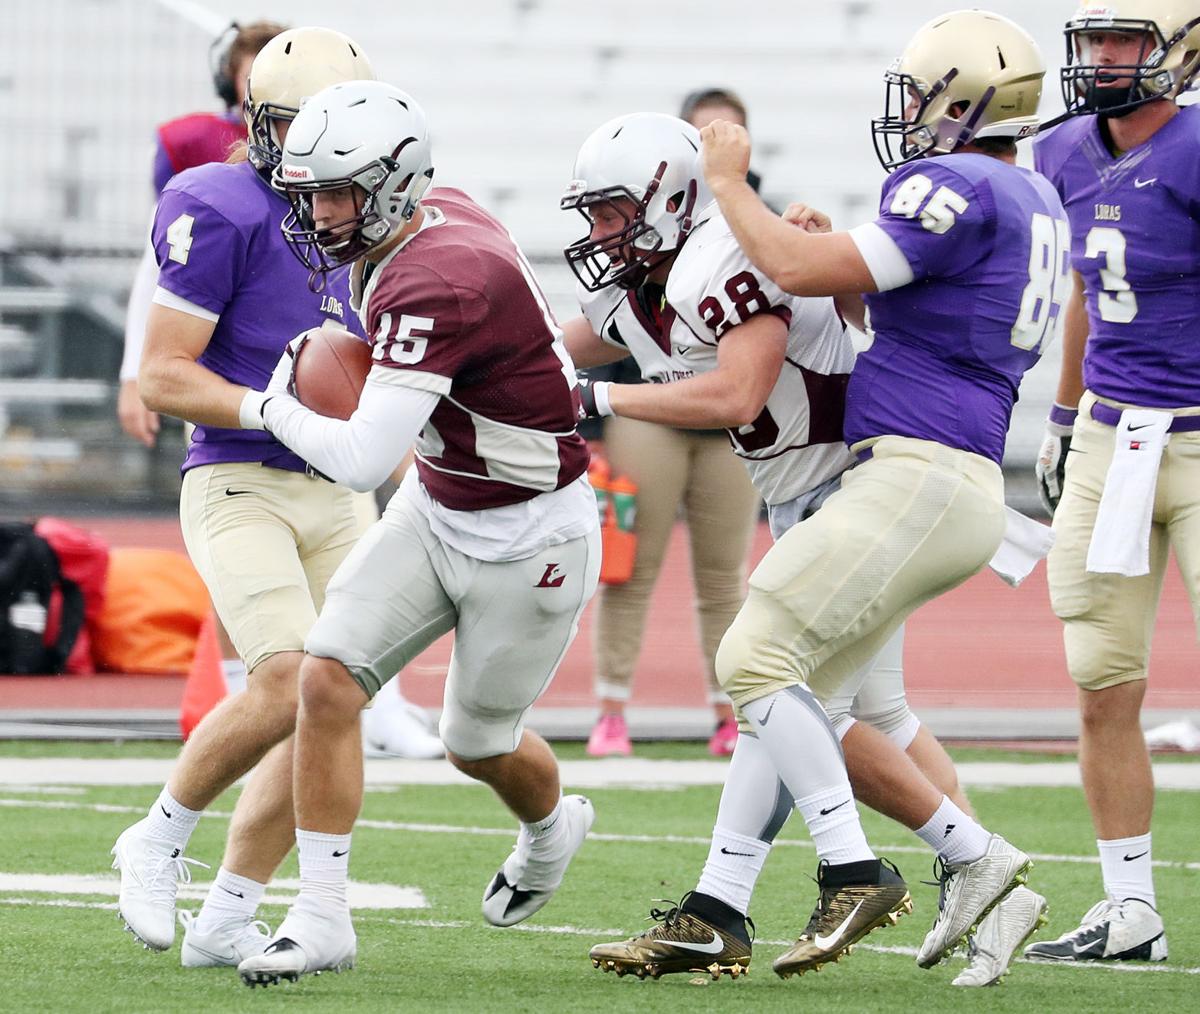 UWLa Crosse football Receiving group is fast, strong and athletic